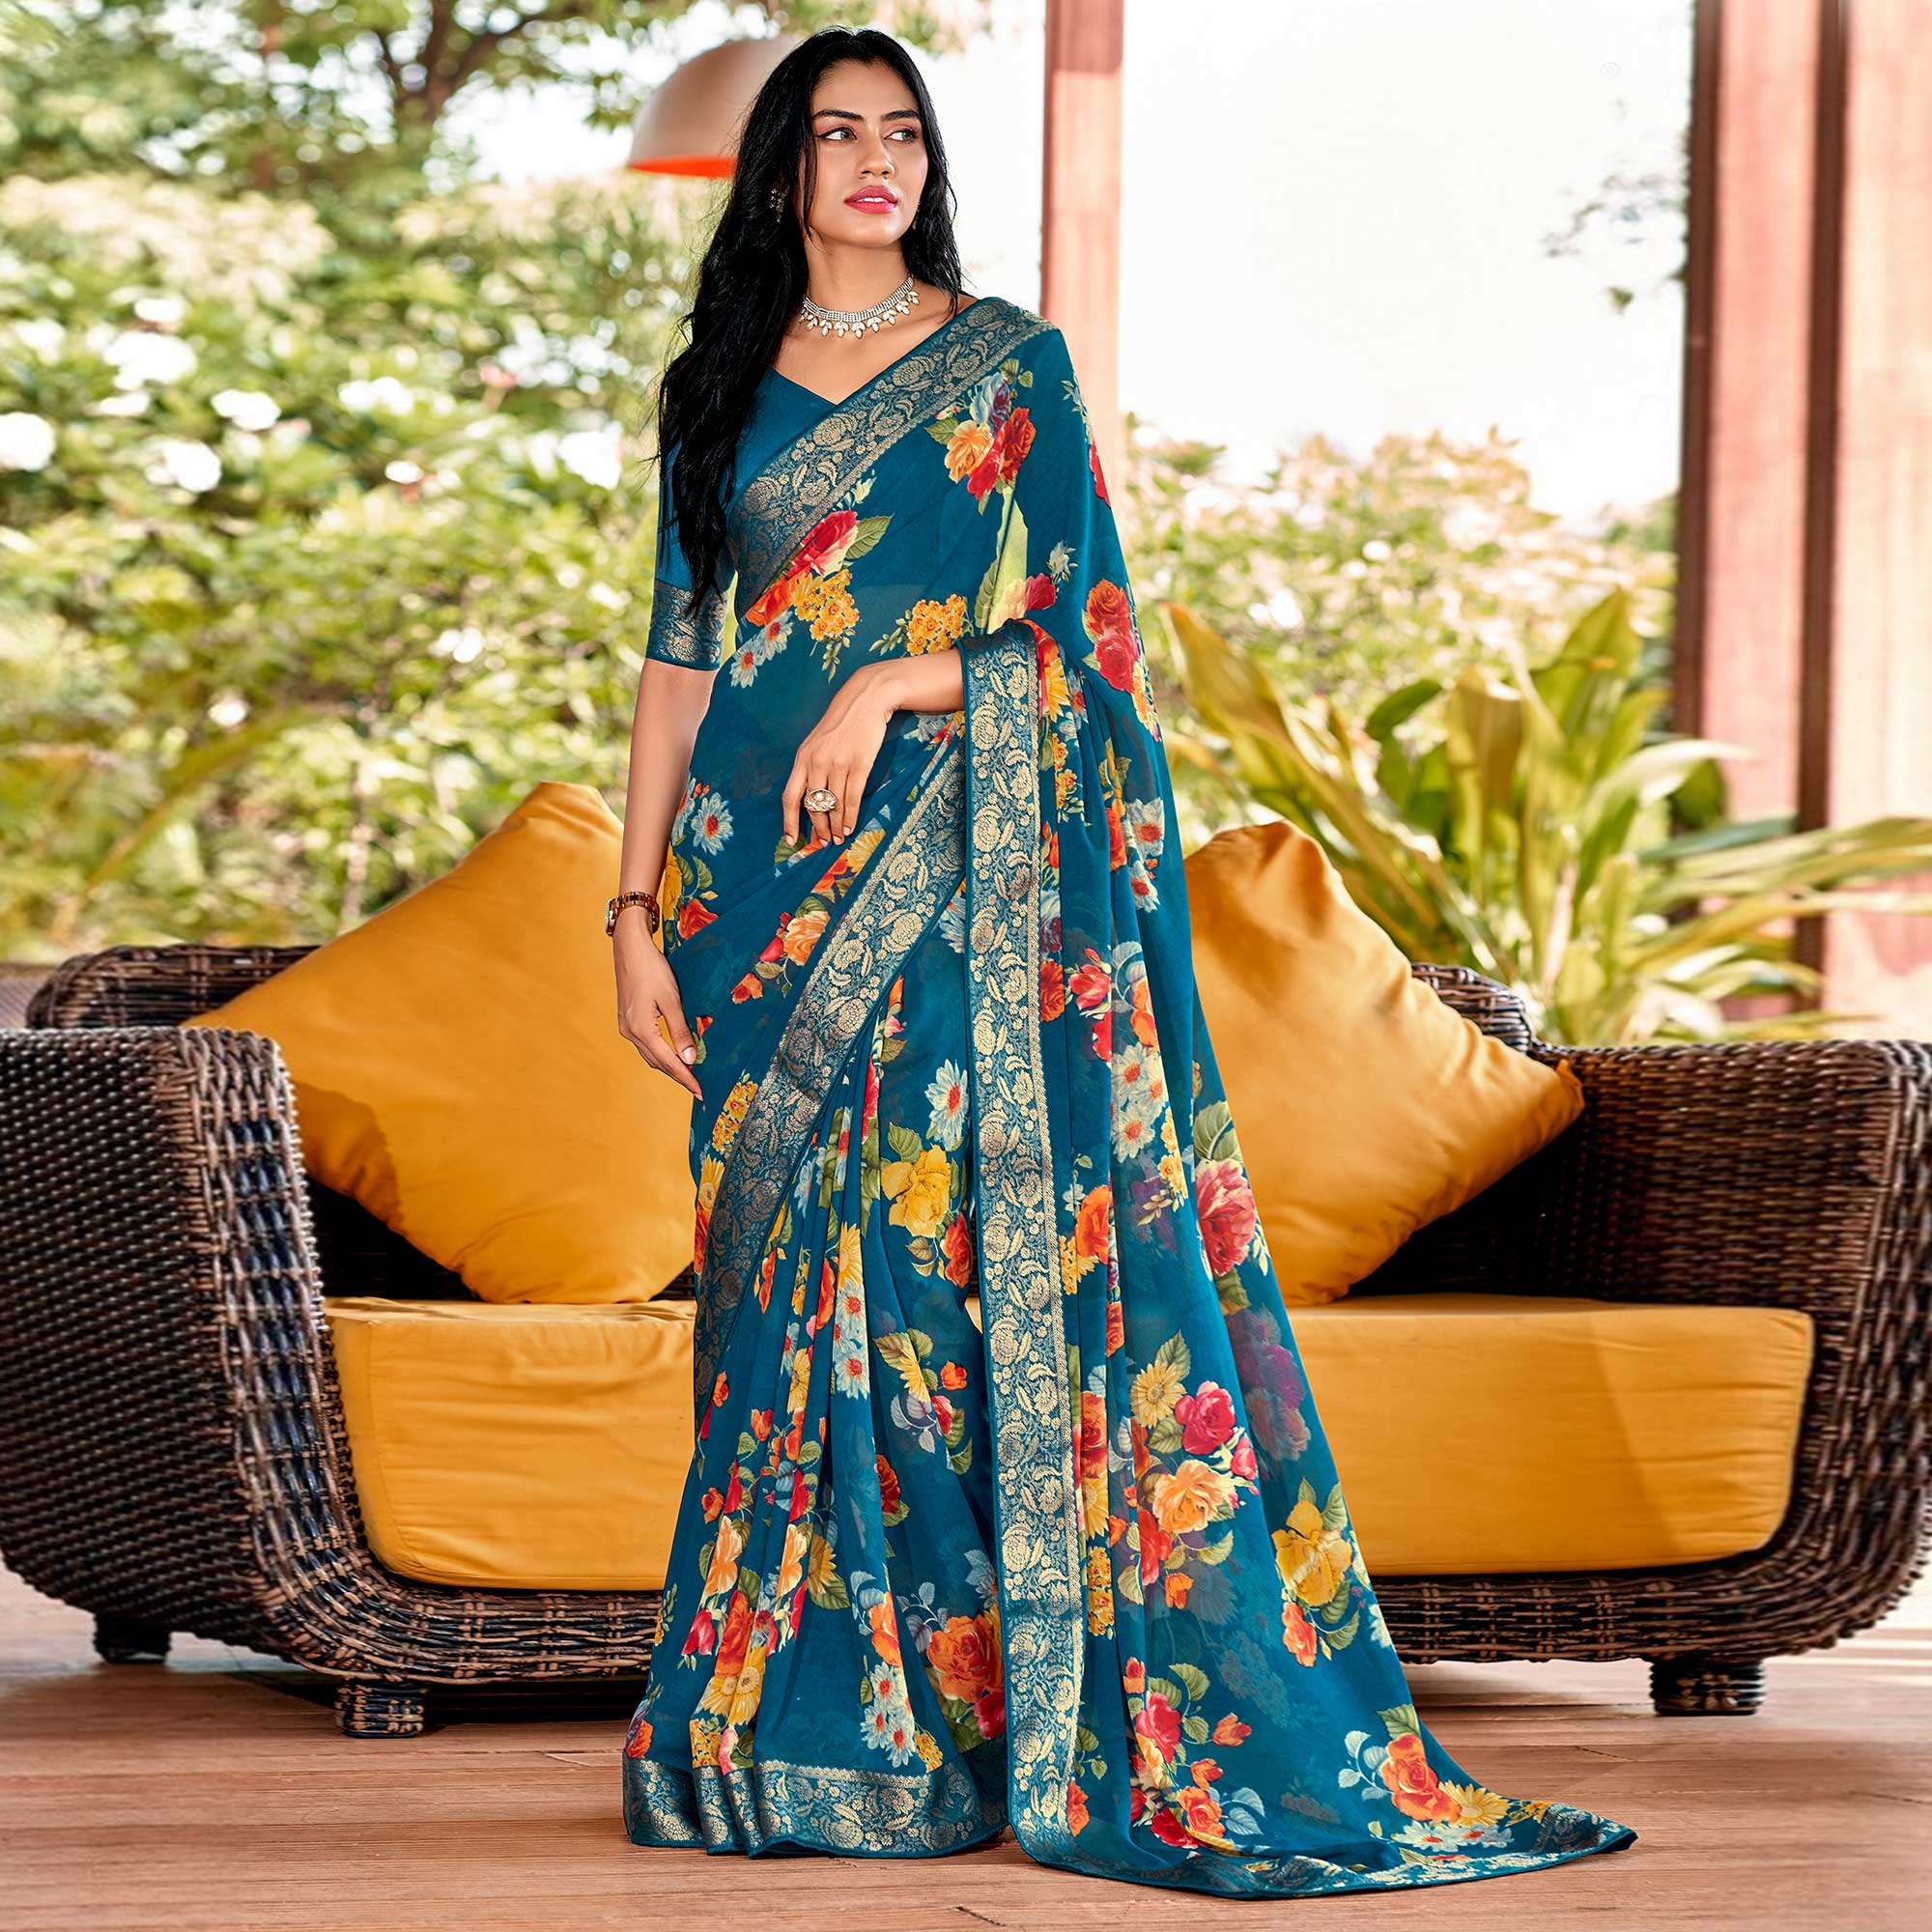 Teal Floral Printed Georgette Saree With Border & Jacquard Blouse